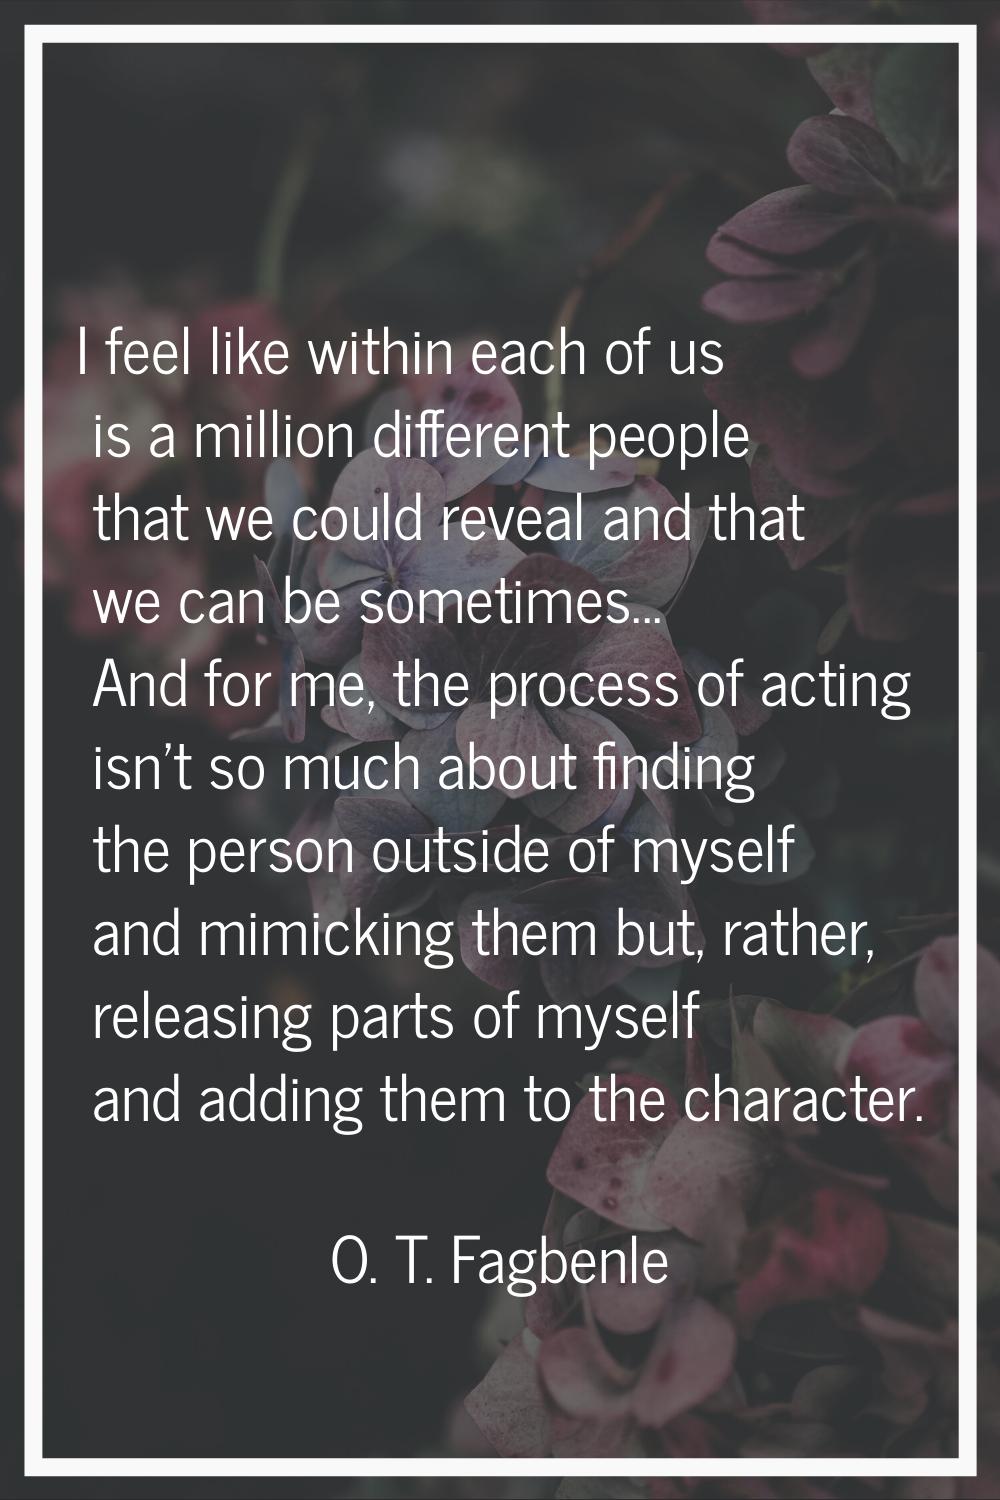 I feel like within each of us is a million different people that we could reveal and that we can be